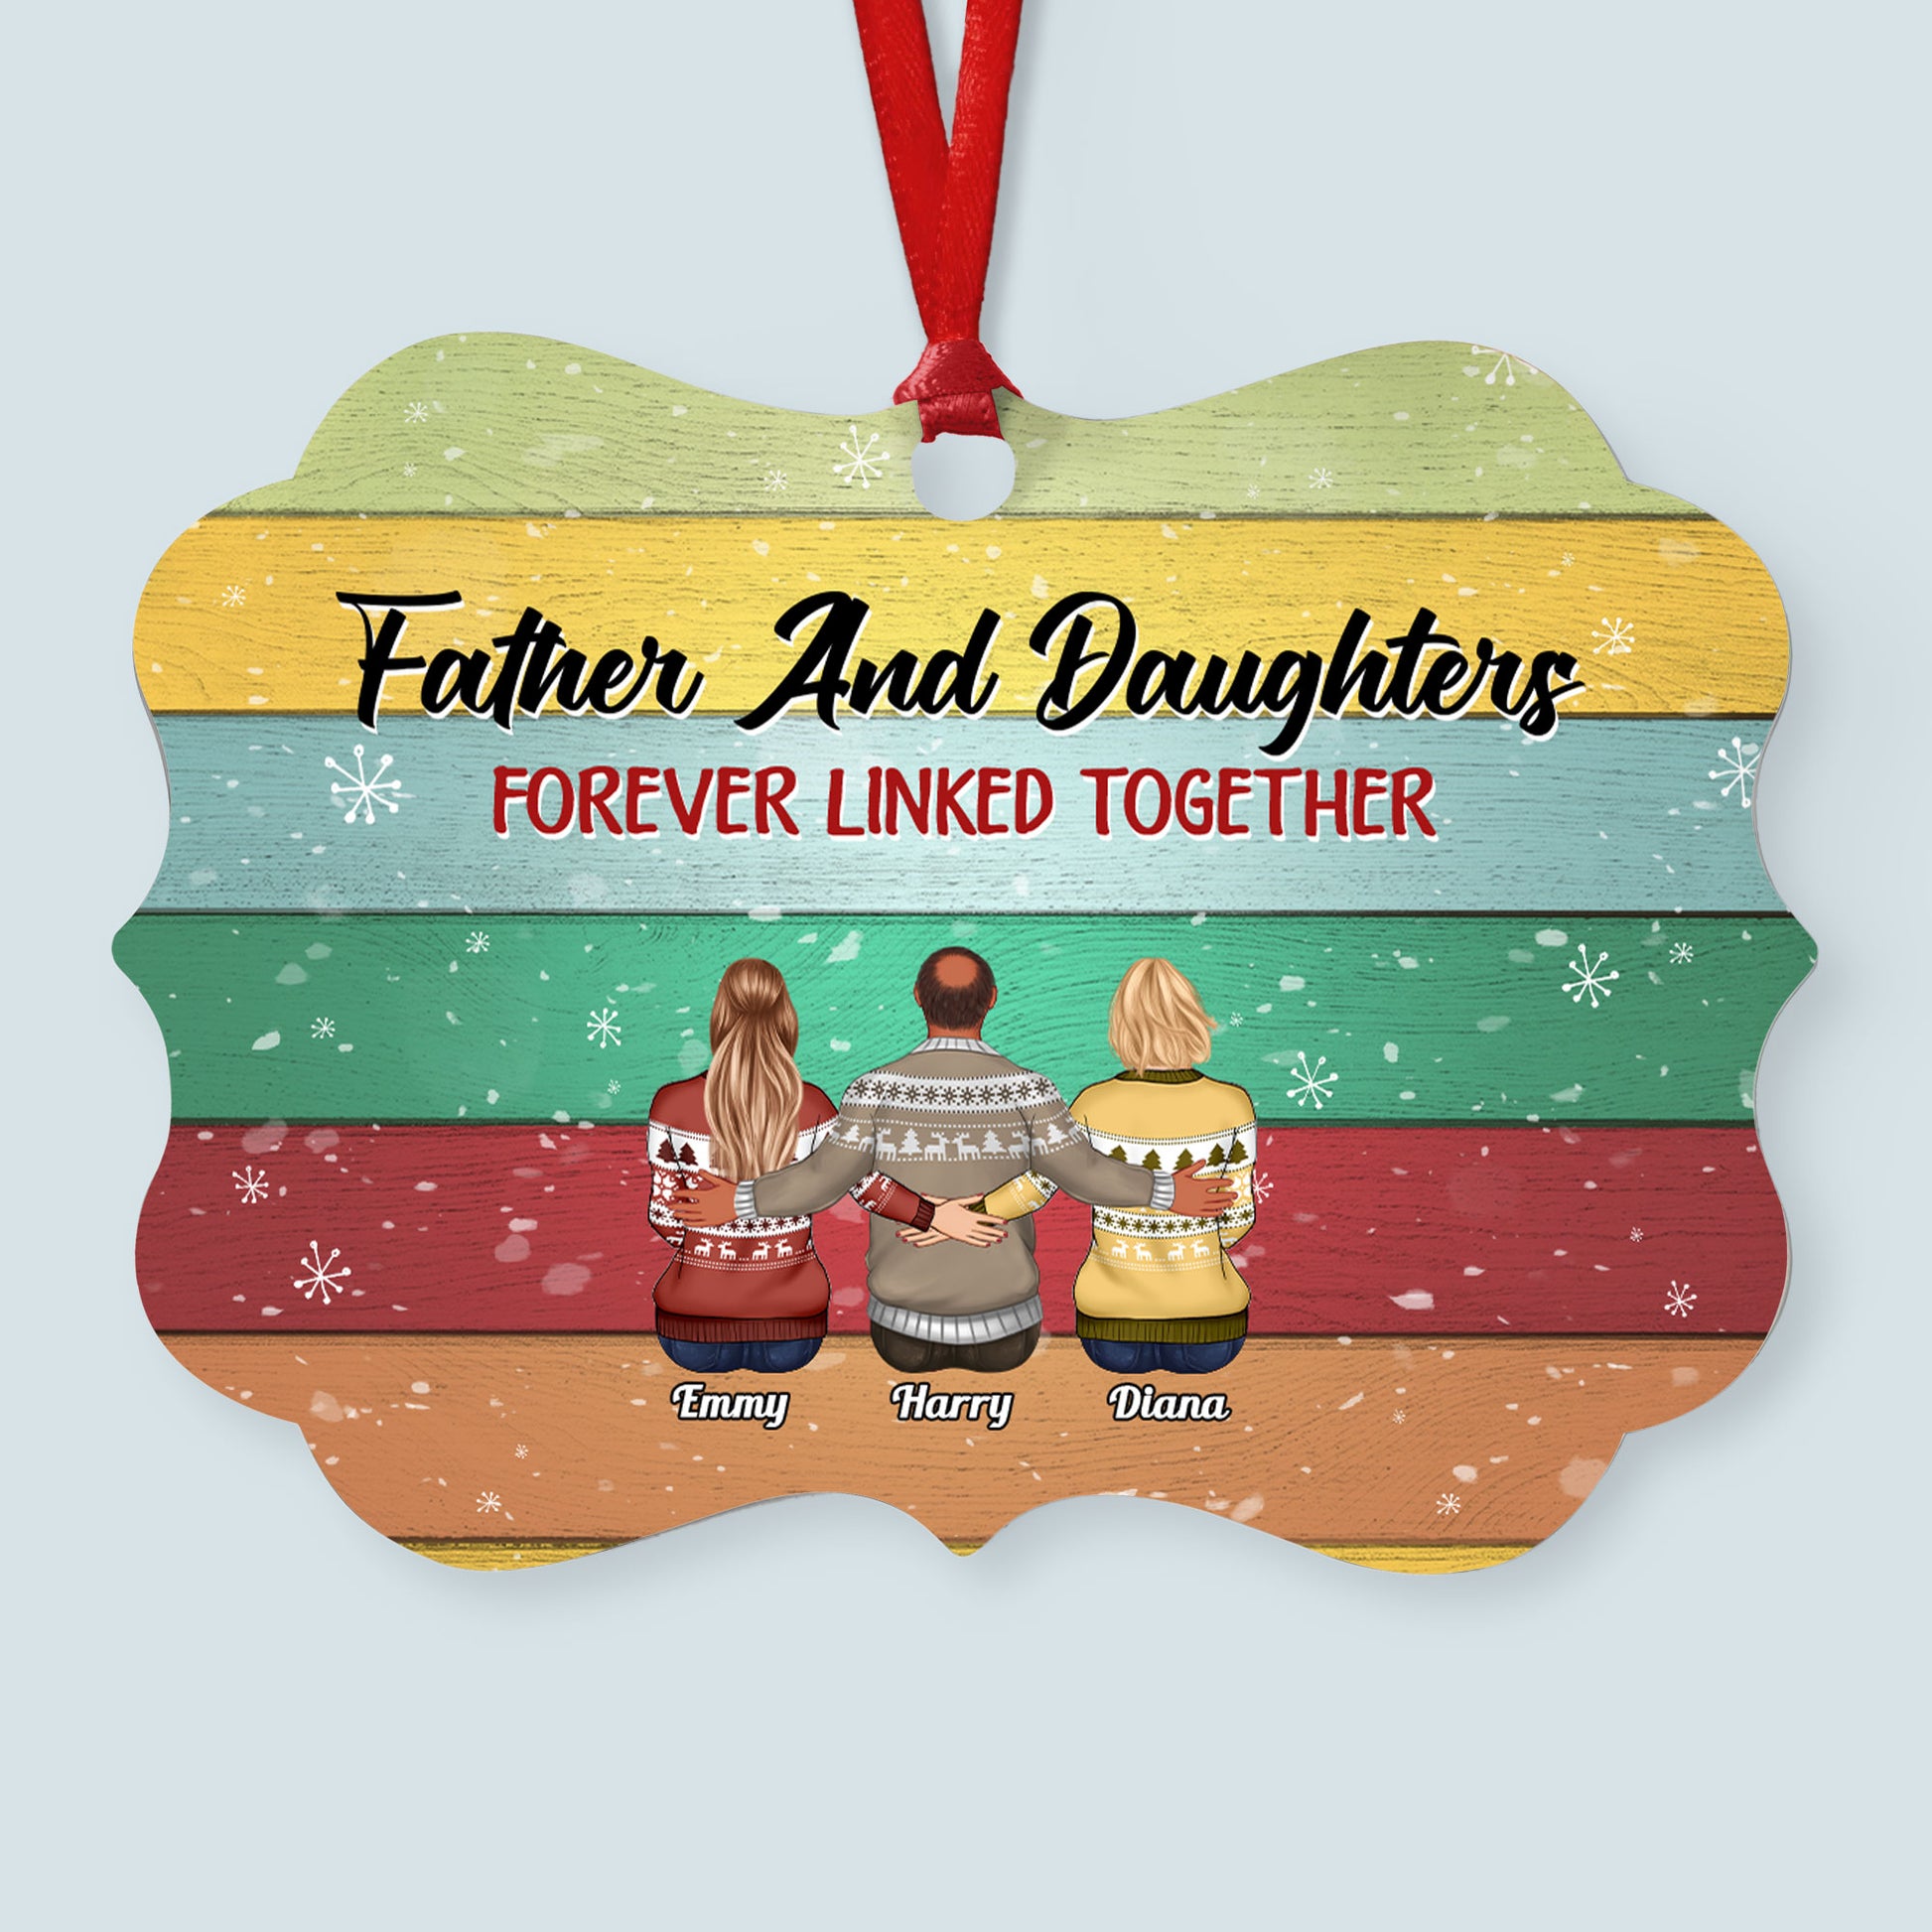 Parents & Children Forever Linked Together - Personalized Aluminum Ornament - Christmas Gift Parents Ornament For Dad, Mom, Children - Family HuggingParents & Children Forever Linked Together - Personalized Aluminum Ornament - Christmas Gift Parents Ornament For Dad, Mom, Children - Family Hugging